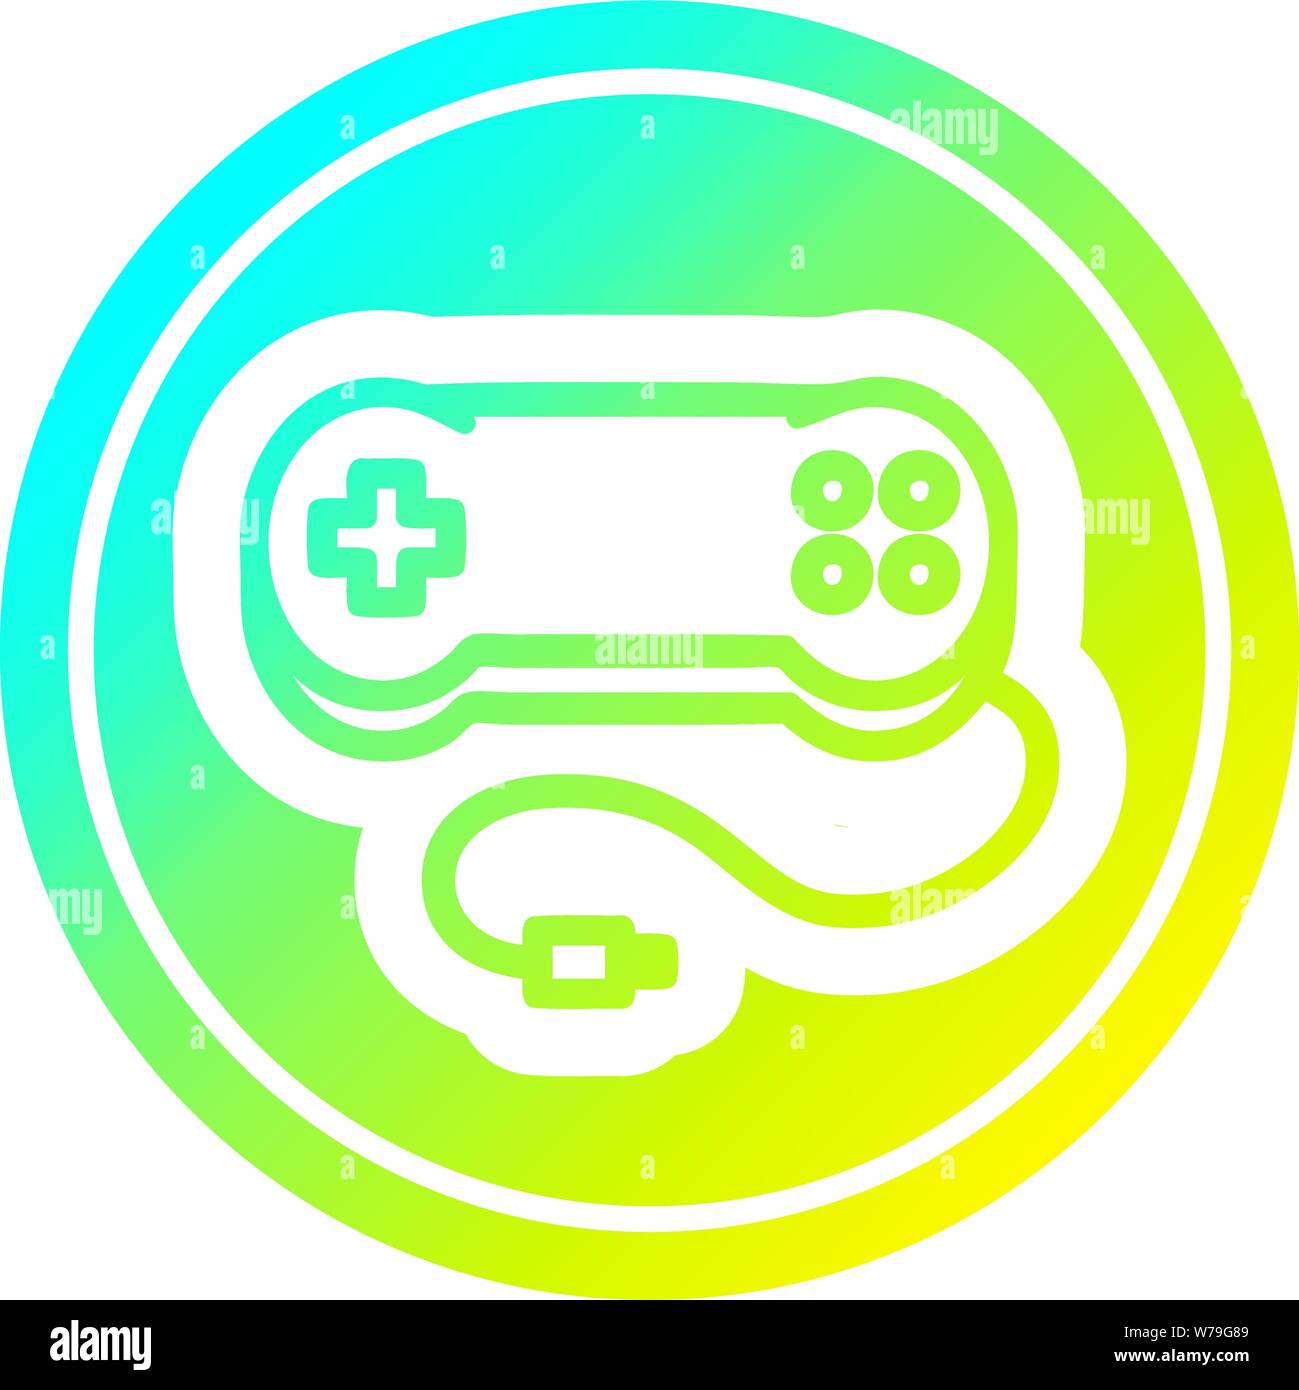 Game settings pixel perfect gradient linear vector icon. Videogame